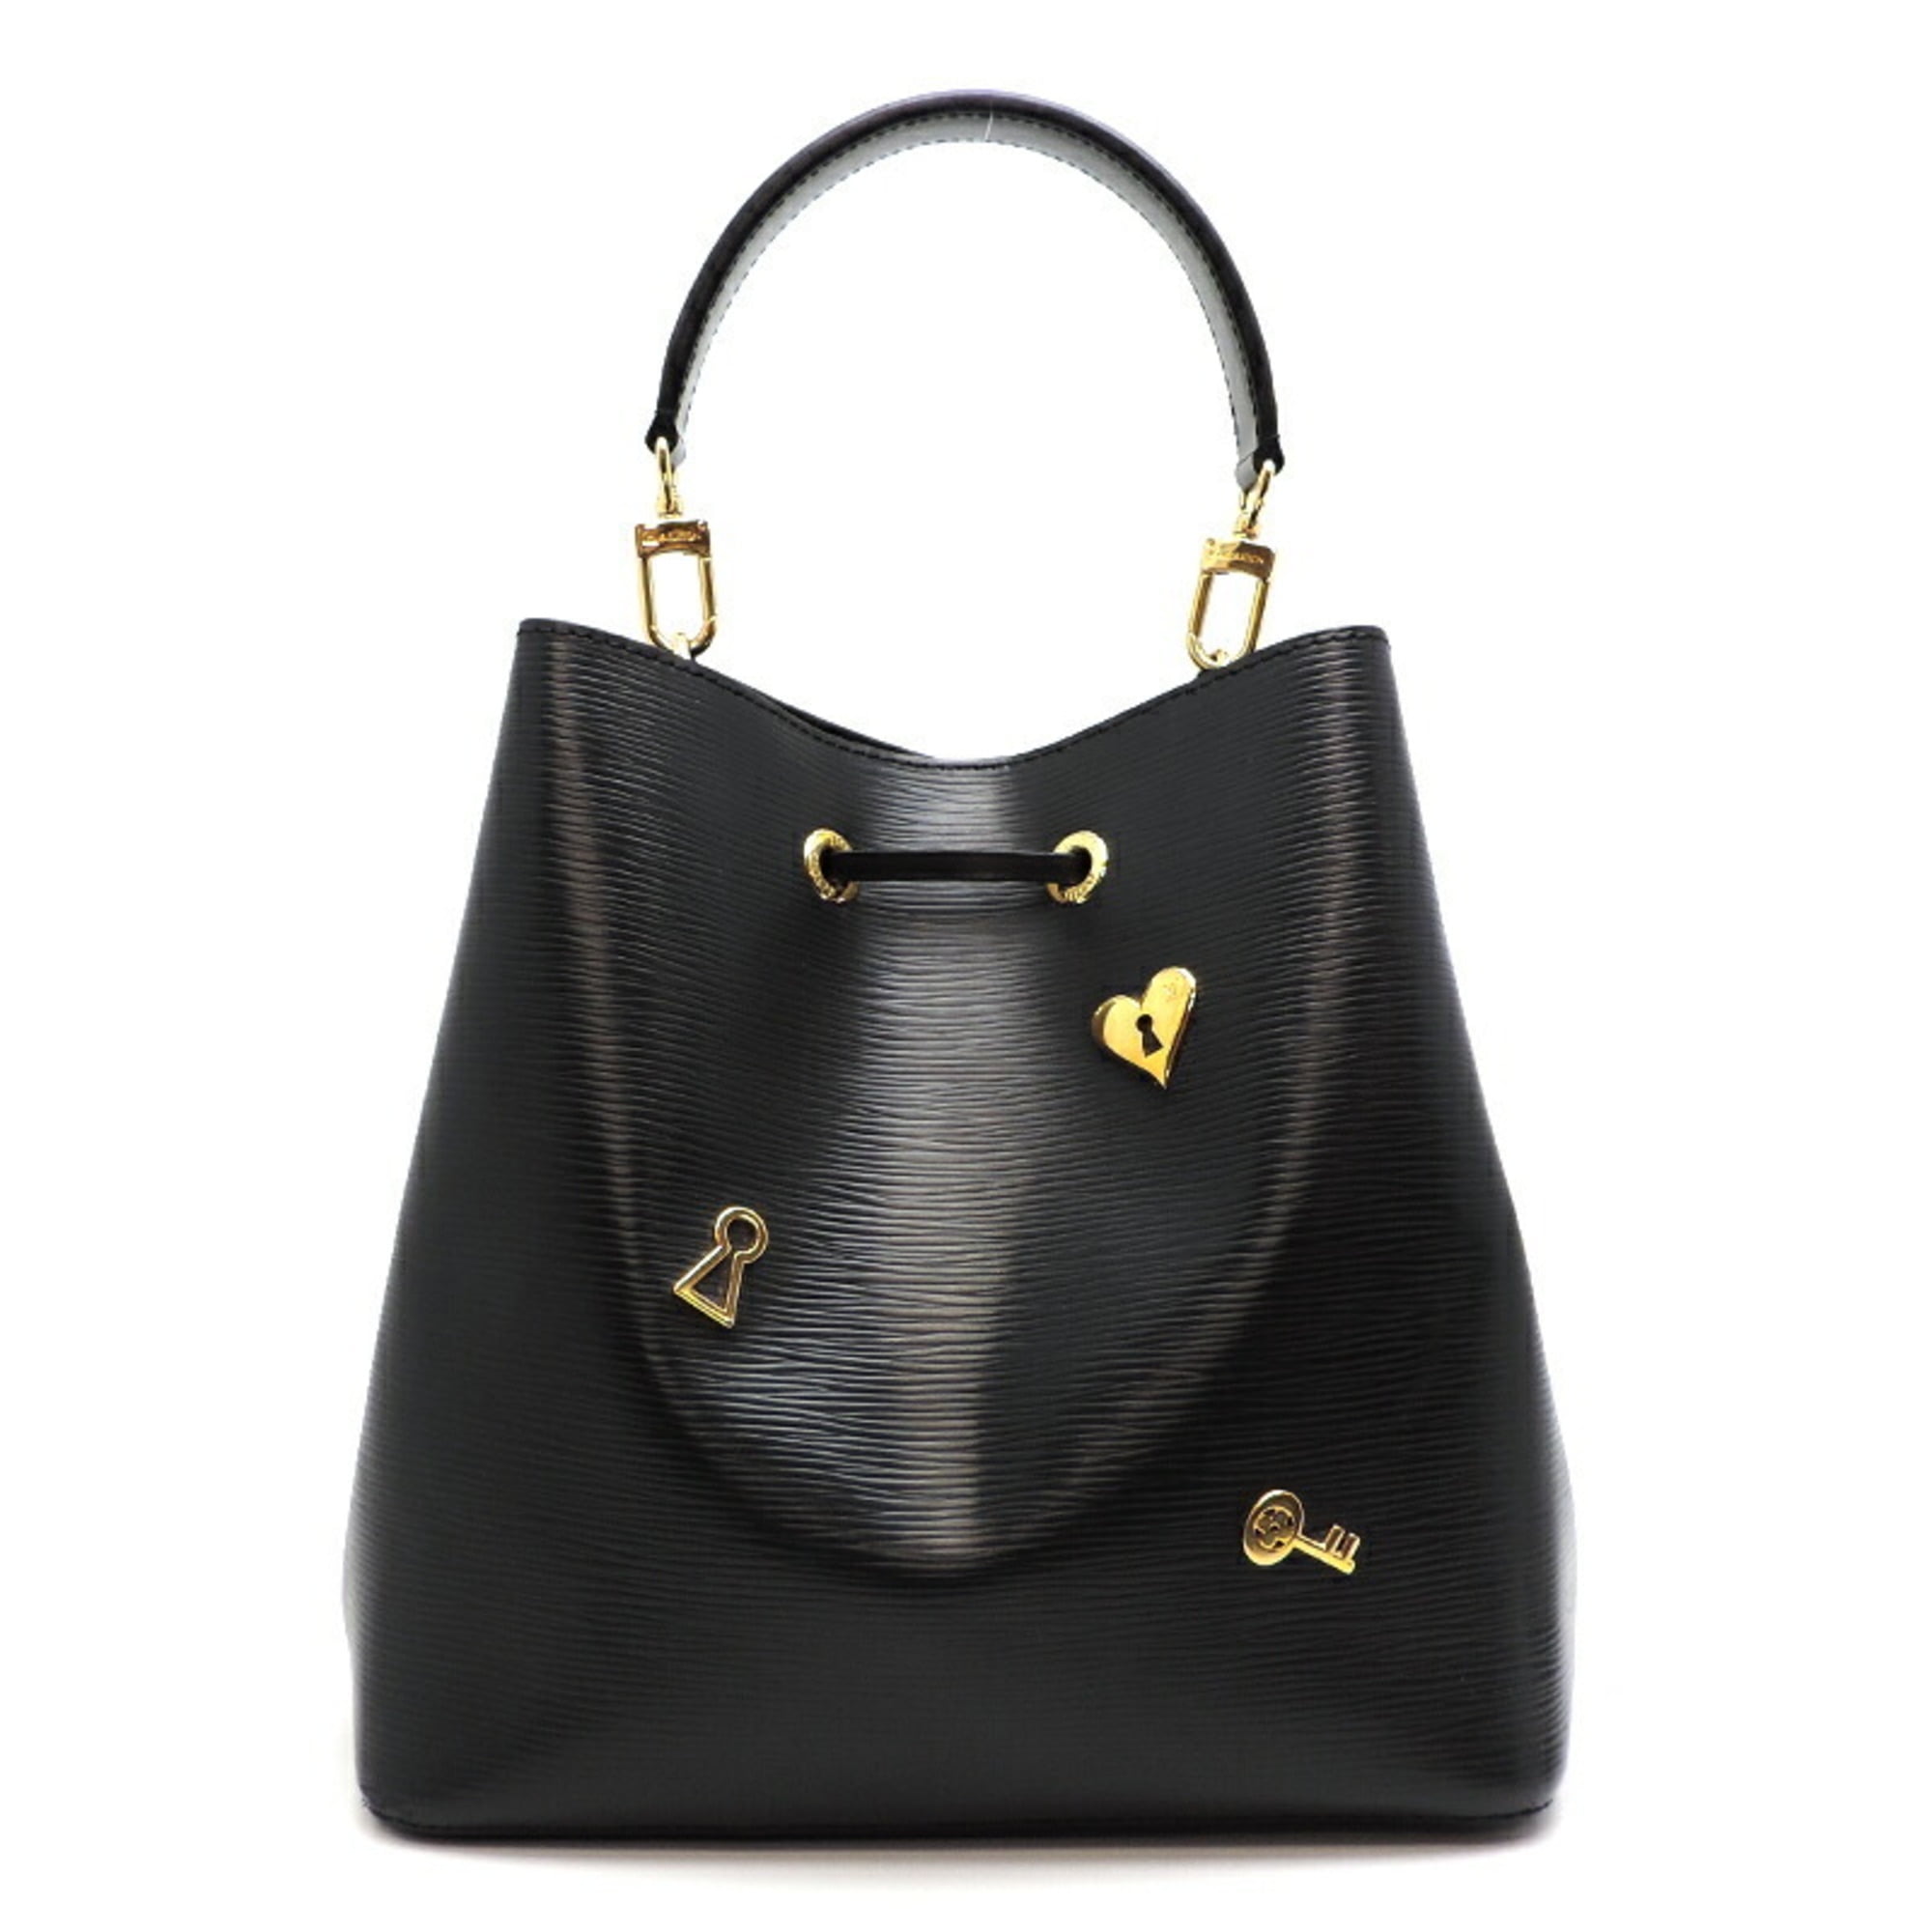 LOUIS VUITTON NEONEO LIMITED EDITION LOVE LOCK BAG